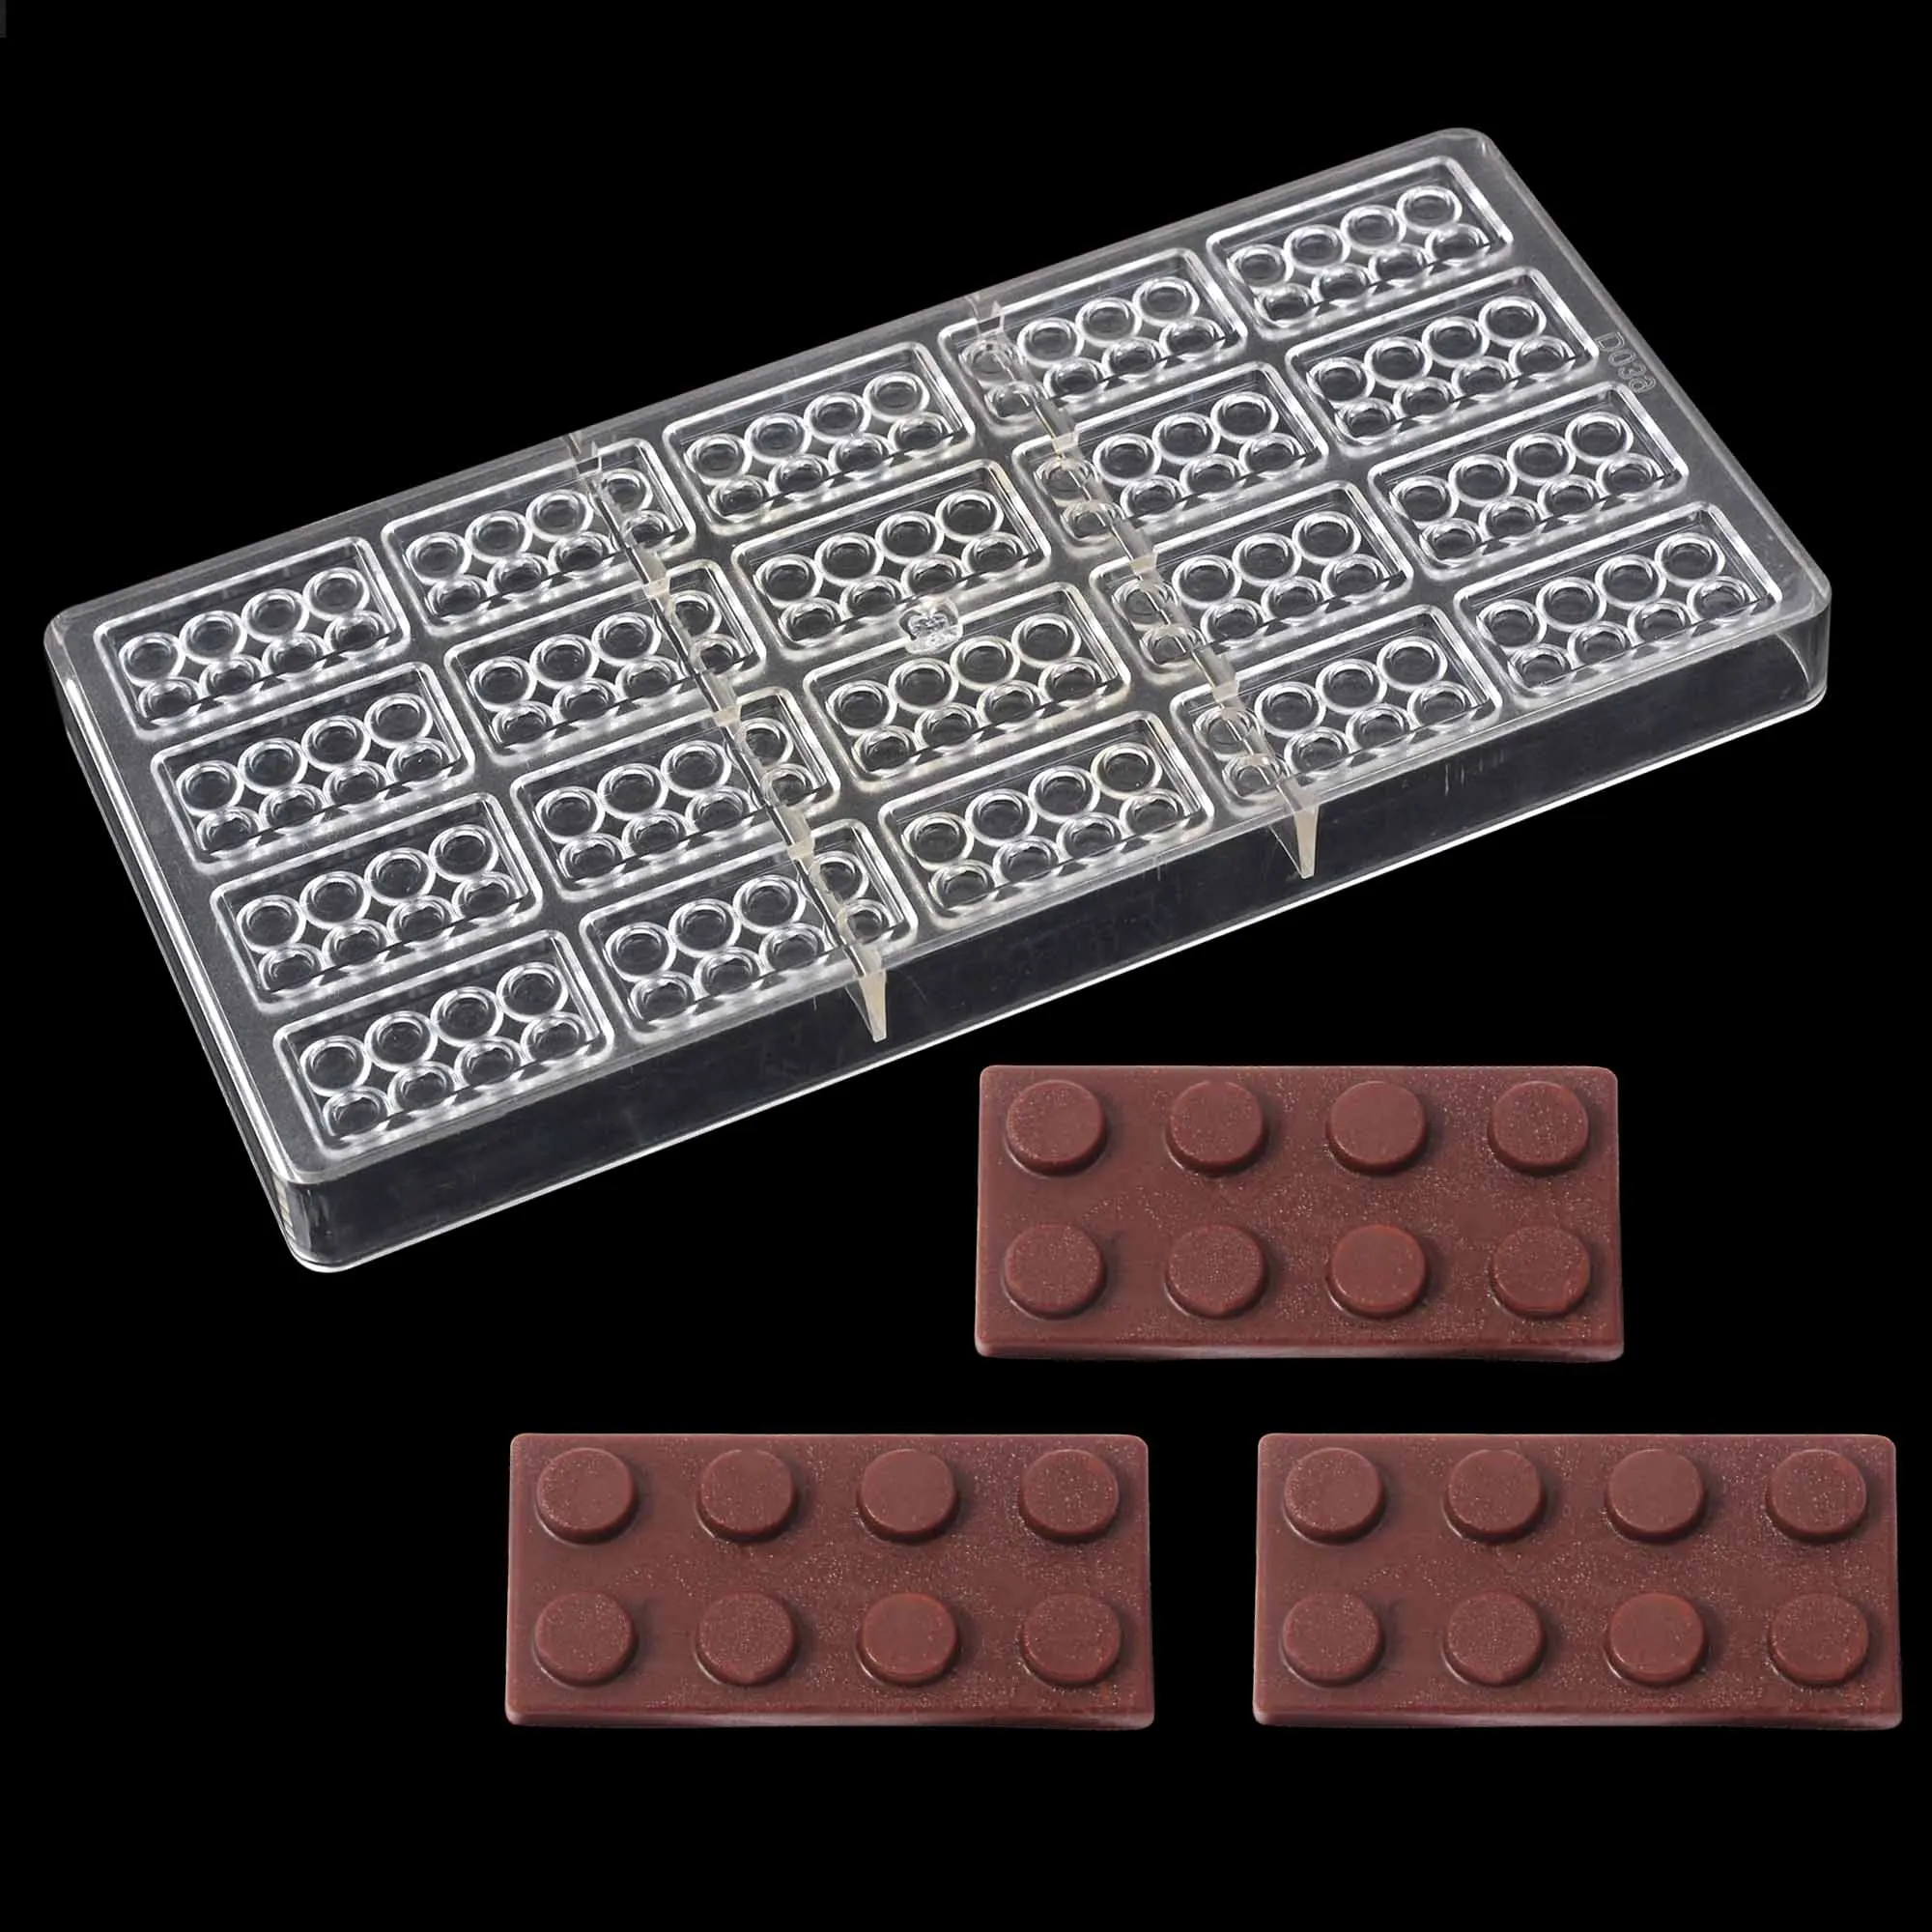 

DIY 3D Food Grade Polycarbonate Chocolate Bar Mold Candy Bakeware Pc Chocolate Mould Jelly Tray Baking Pastry Tool